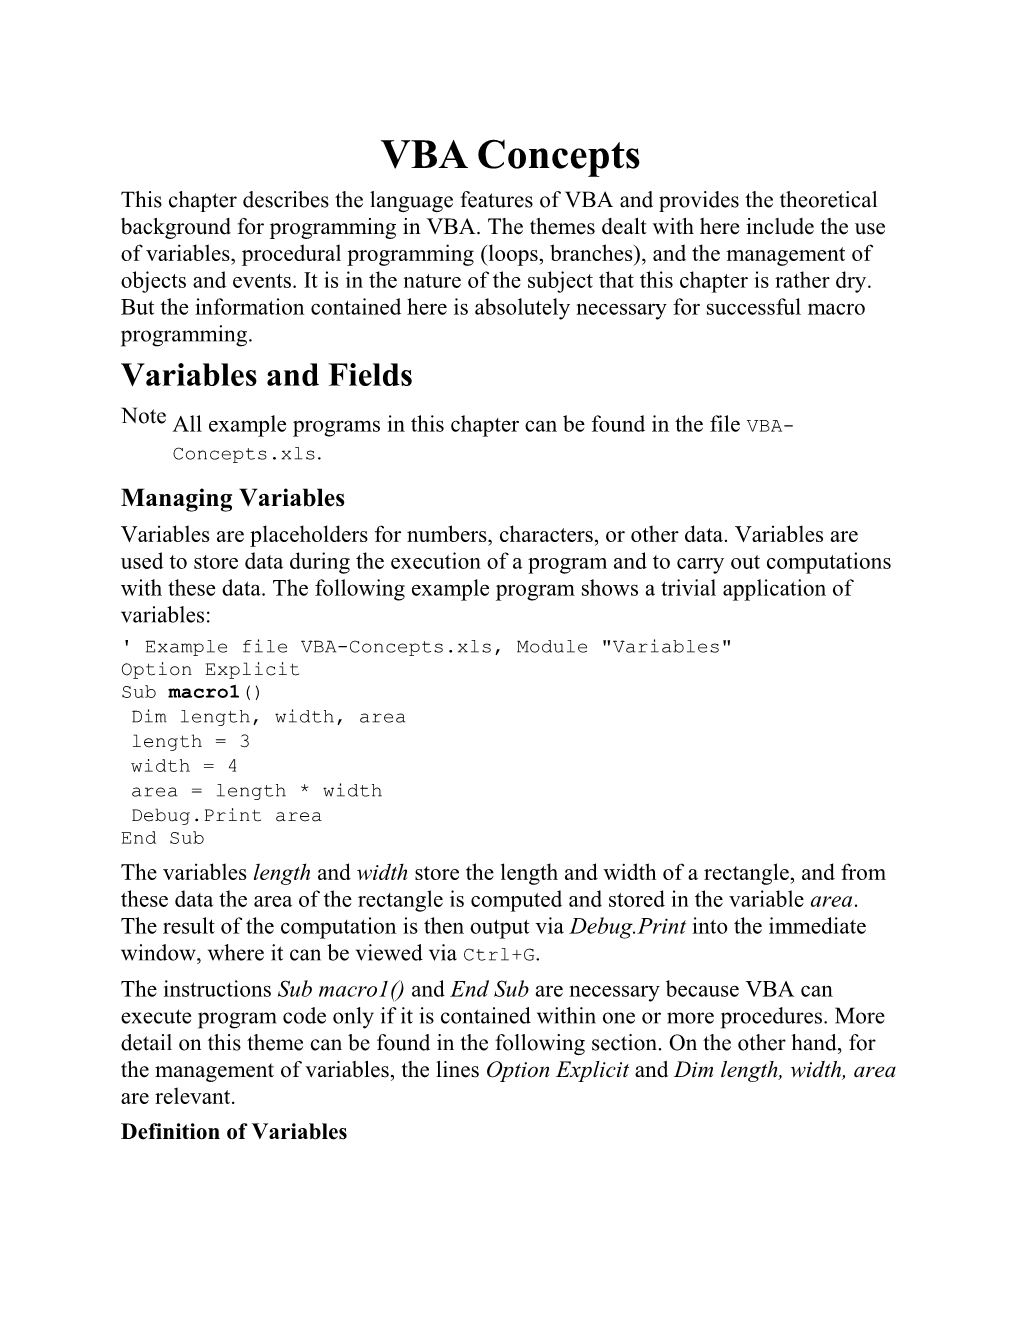 Variables and Fields